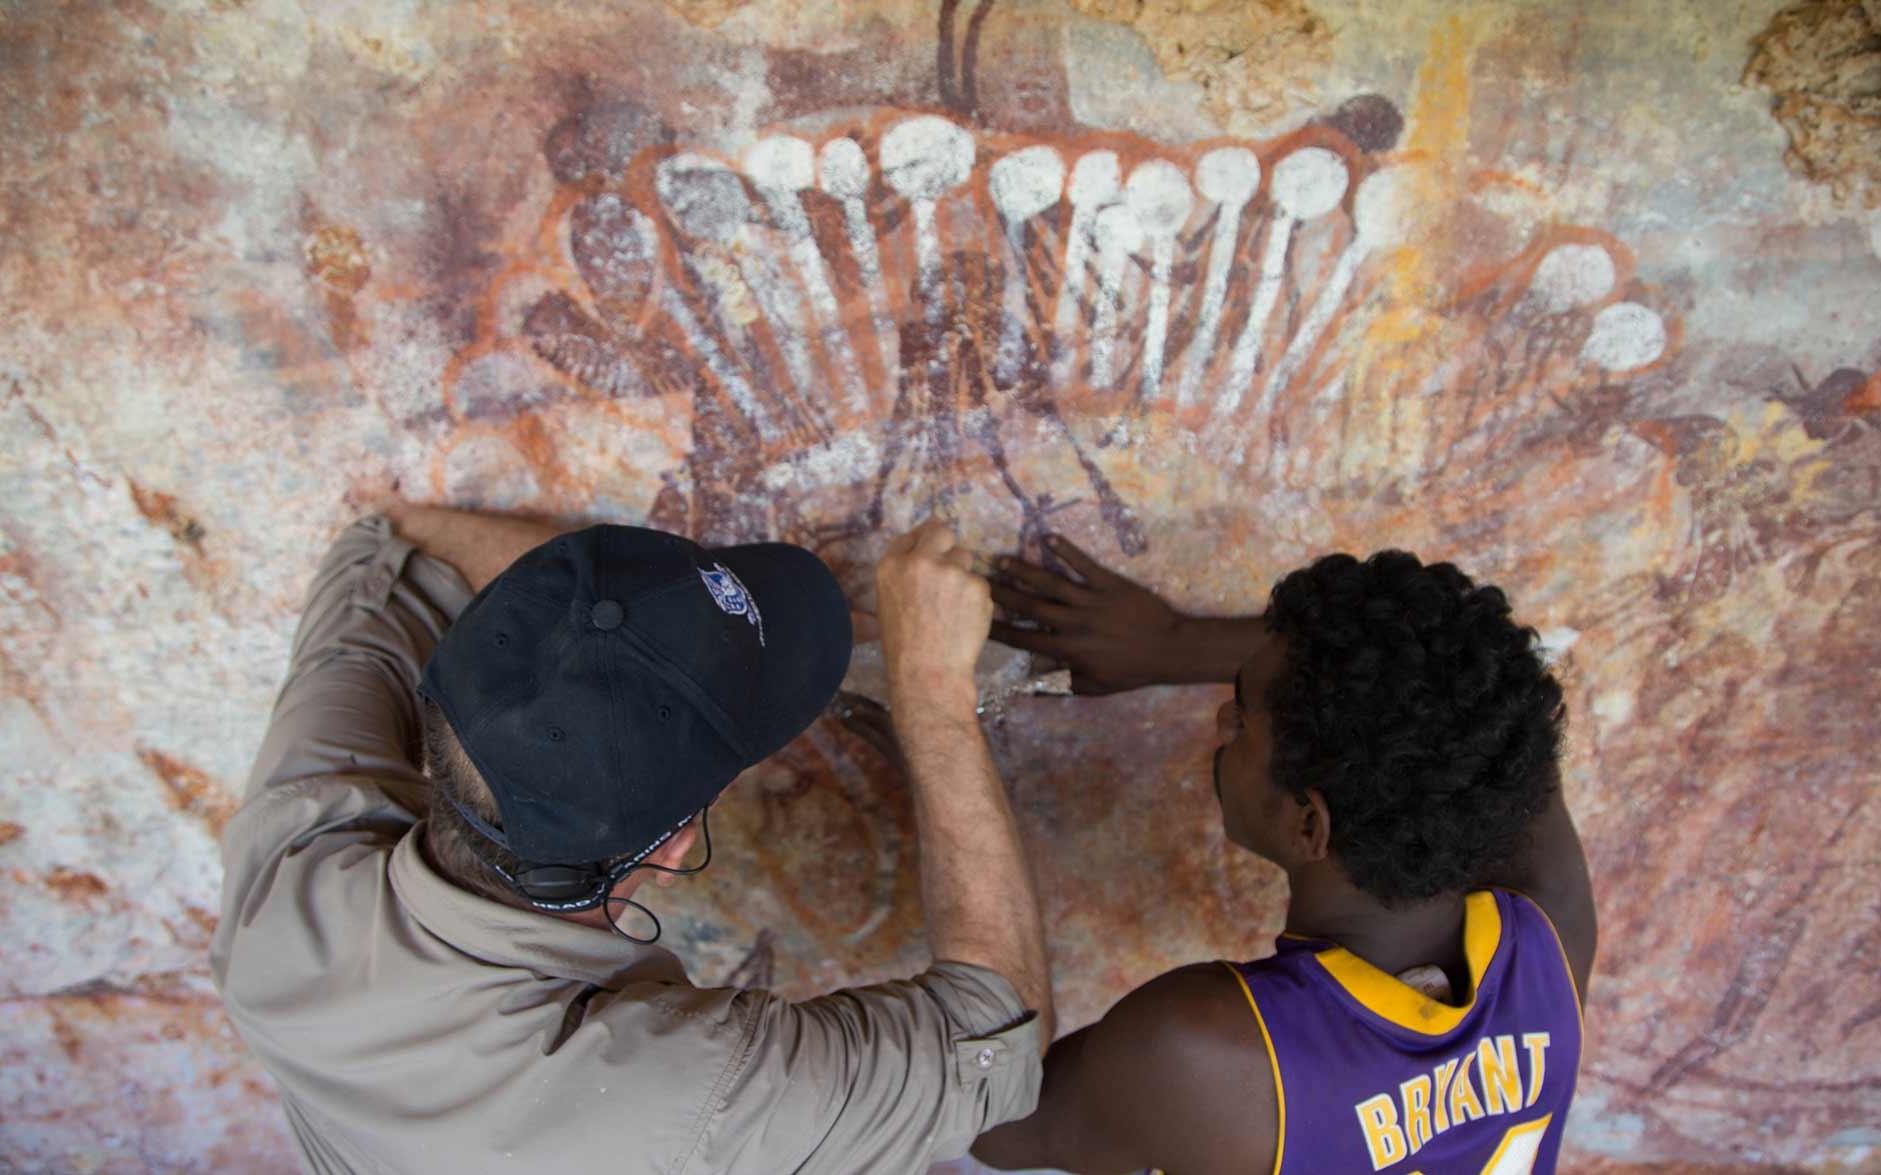 Photograph of two men scraping a sample of paint from rock art.